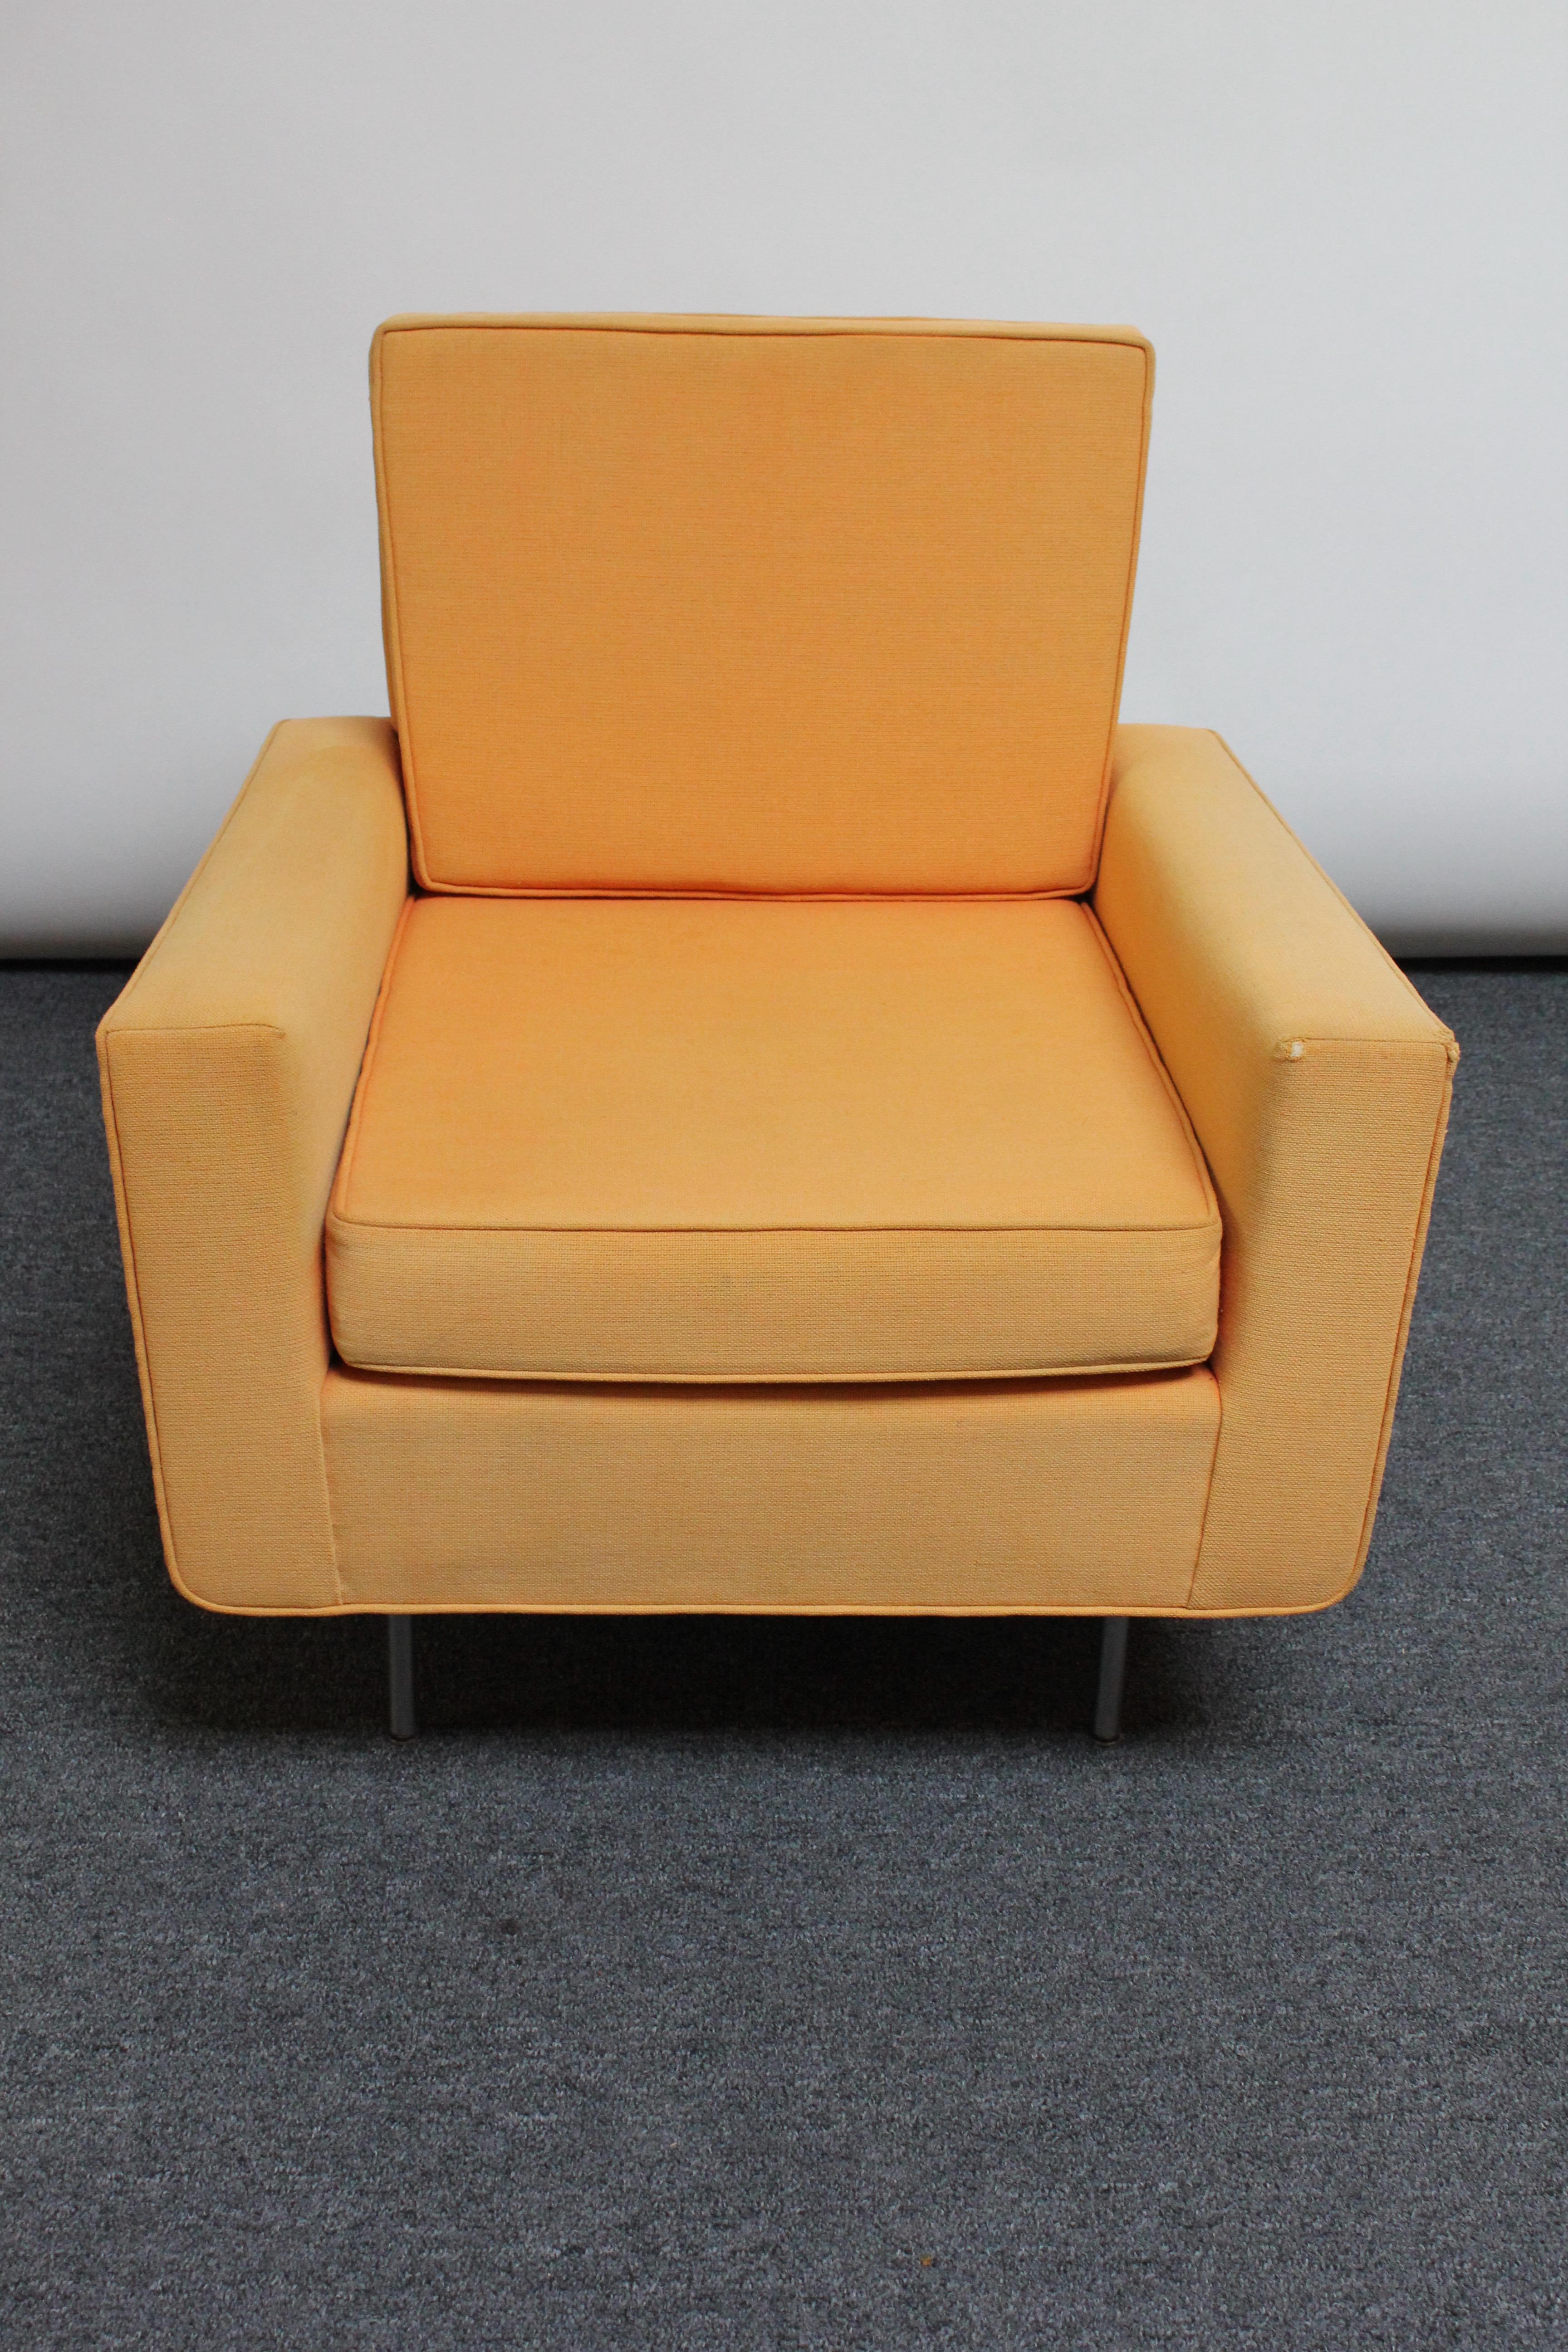 Mid-20th Century Florence Knoll Lounge Chair with Original Wool Upholstery For Sale